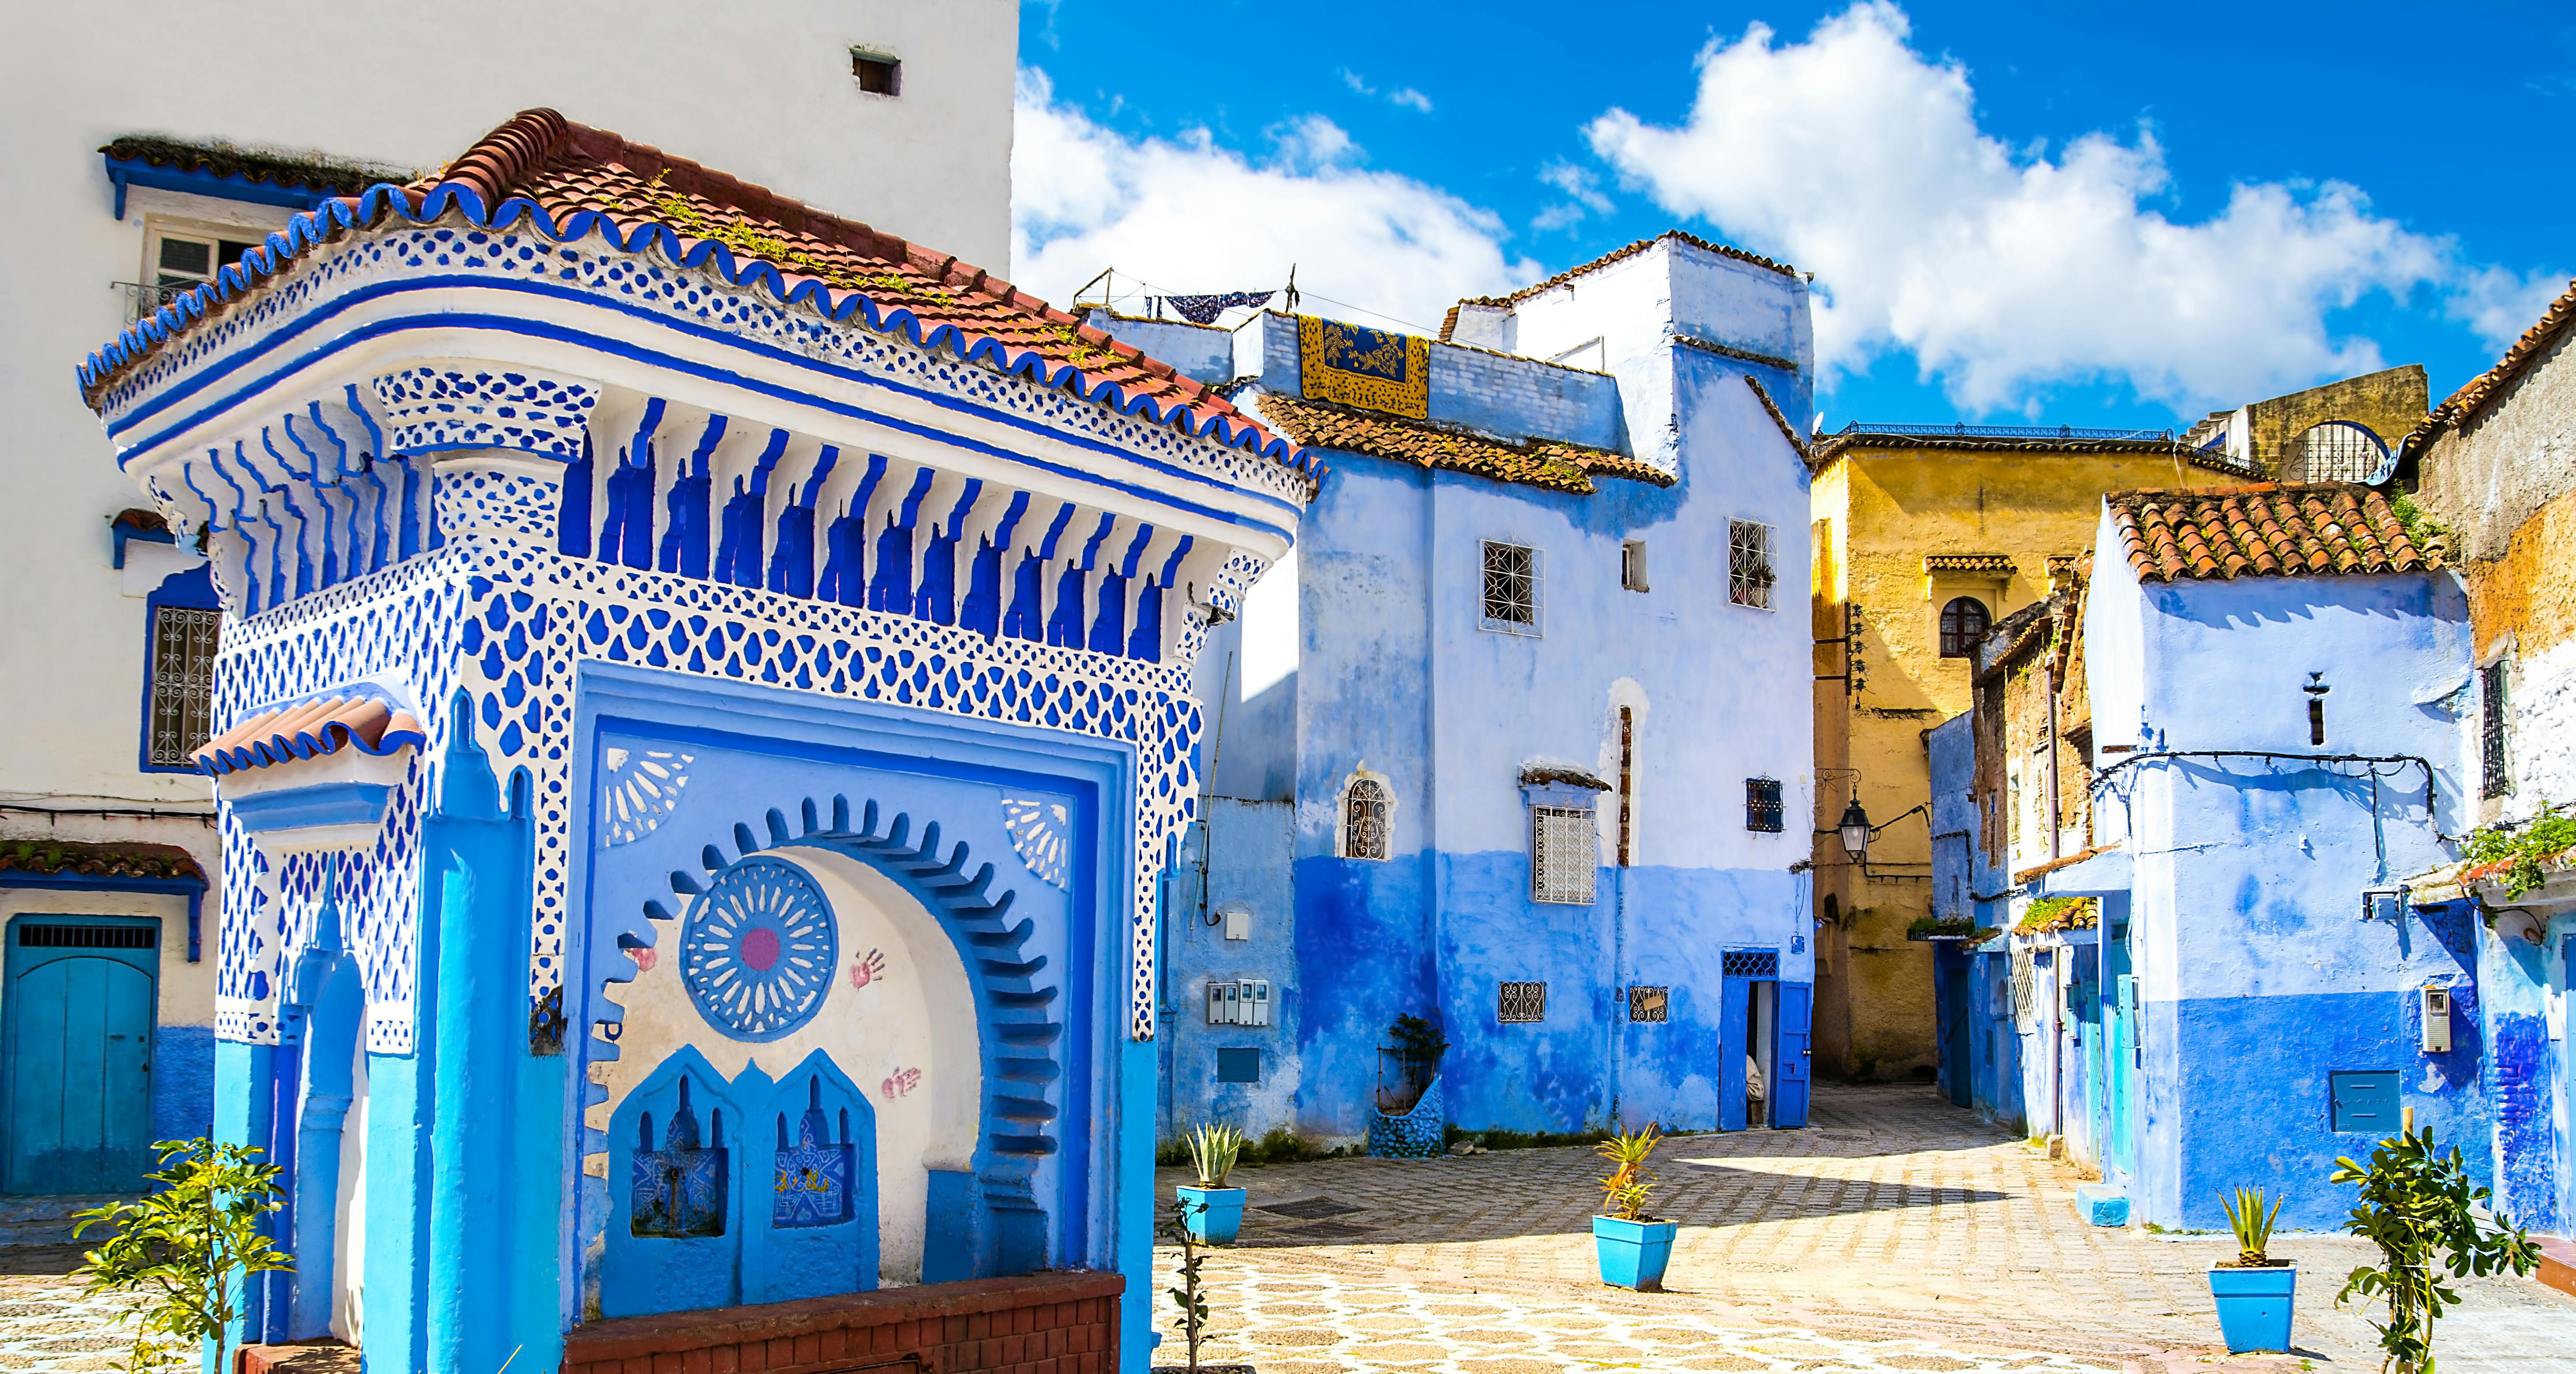 Combo 2 days Guided visit of Chefchaouen and excursion to Akchour Waterfalls. Musement